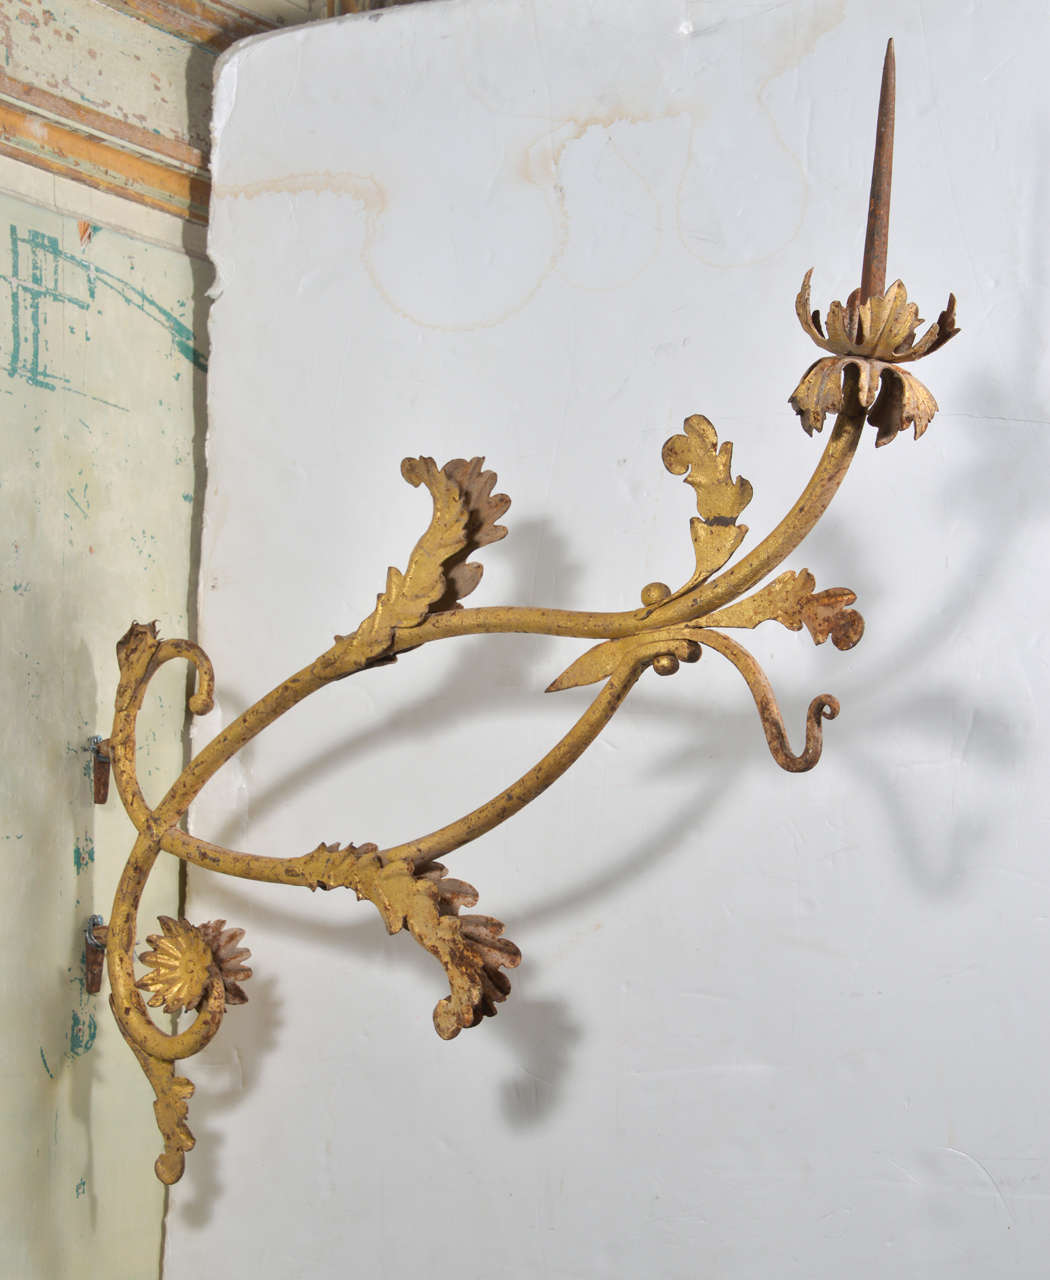 Fabulous pair of Italian gilded sconces from the 18th century.